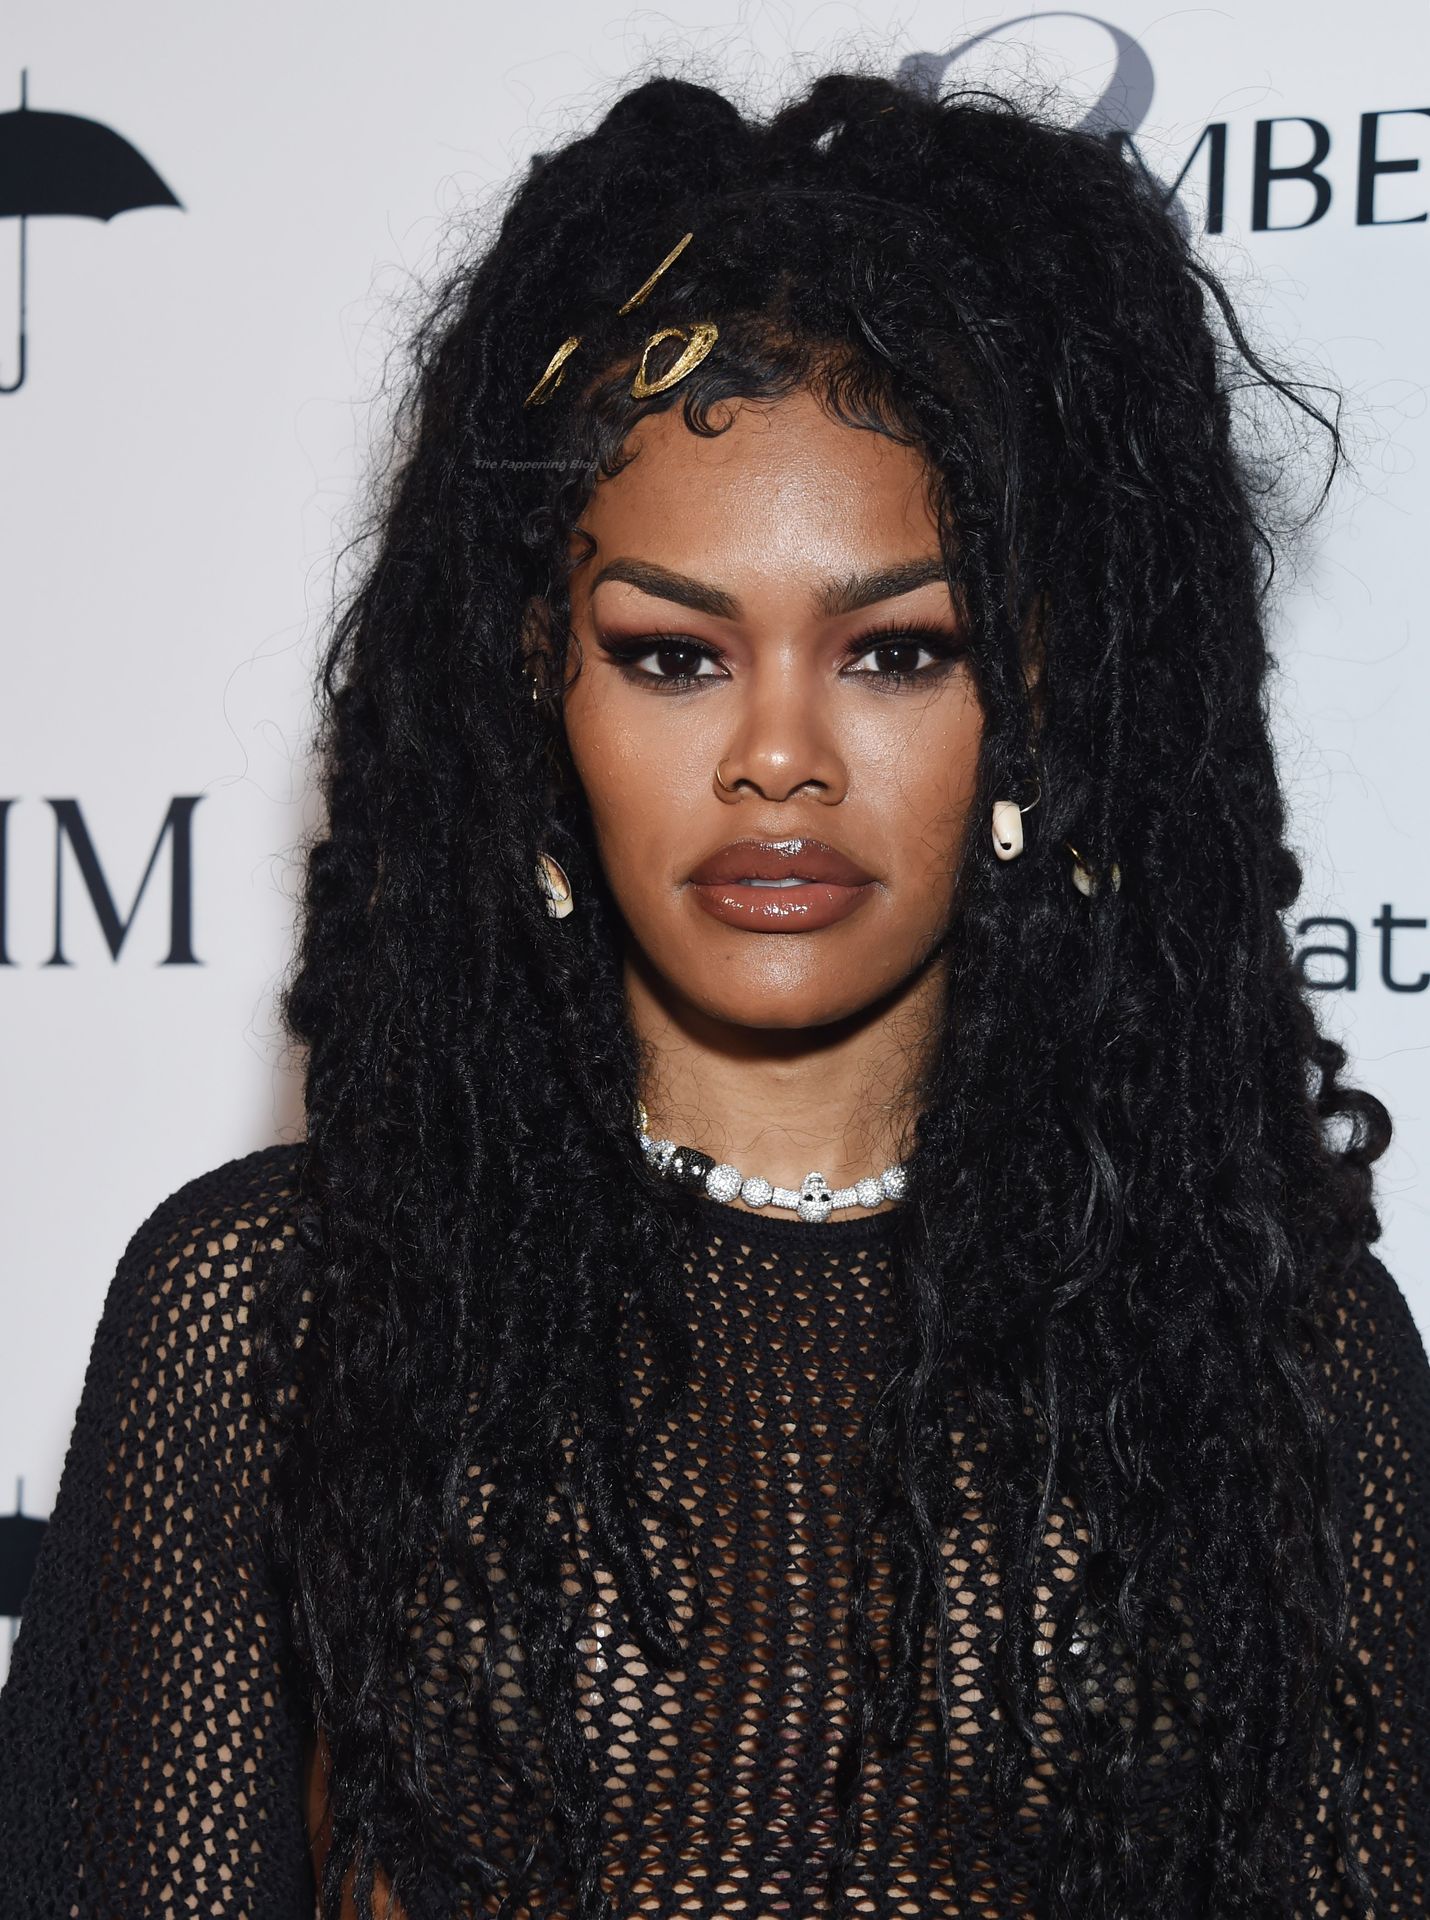 Teyana Taylor Shows Off Her Tits And Butt At The Maxim Hot 100 Event 50 ഫോട്ടോകൾ നഗ്നനായ